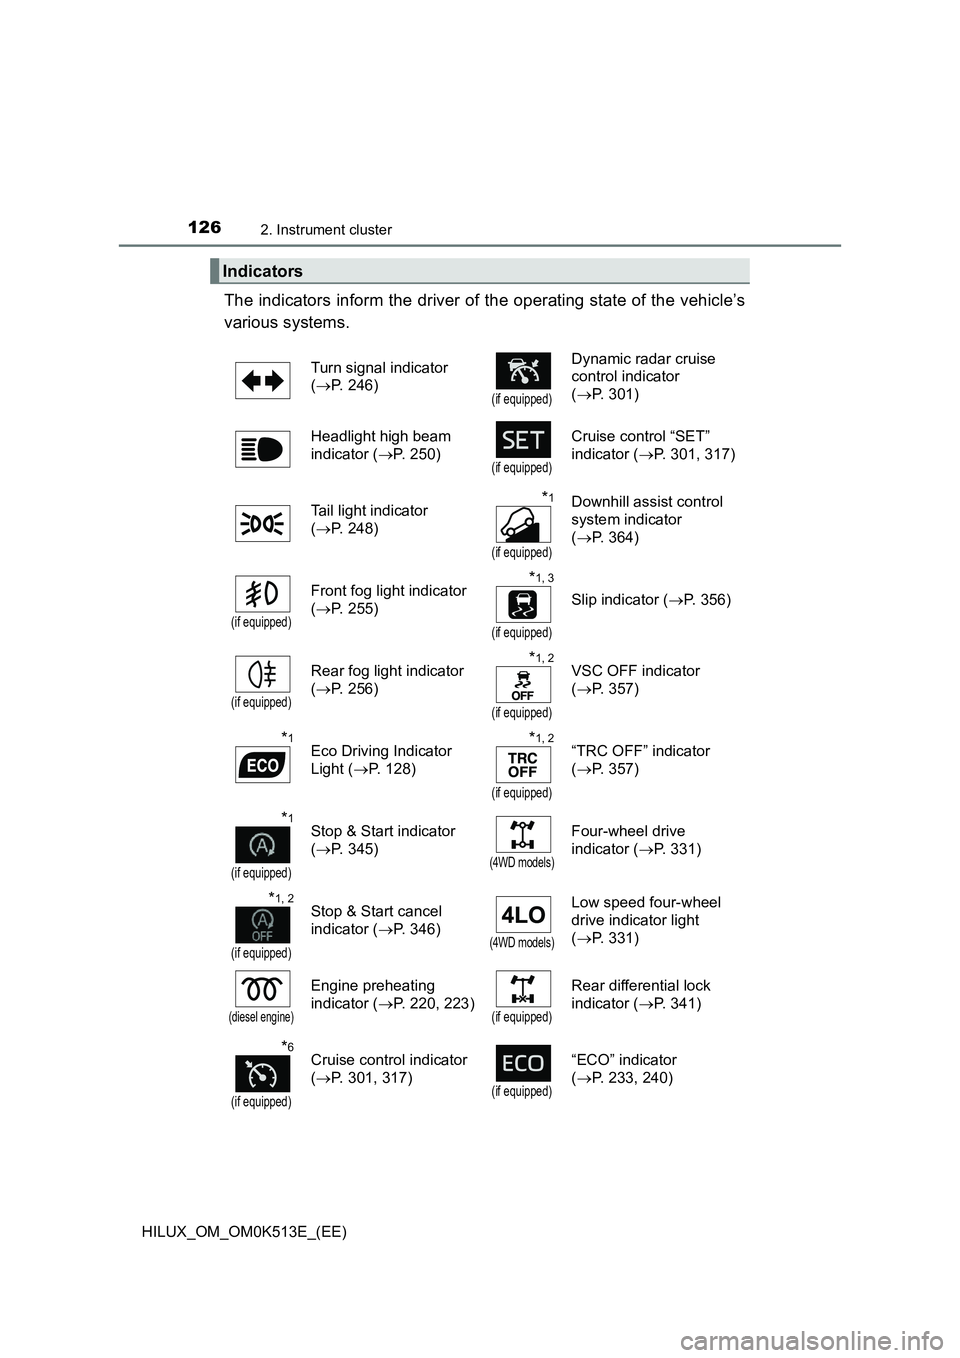 TOYOTA HILUX 2021  Owners Manual (in English) 1262. Instrument cluster
HILUX_OM_OM0K513E_(EE)
The indicators inform the driver of the operating state of the vehicle’s 
various systems. 
Indicators
Turn signal indicator  
( P. 246)(if equippe